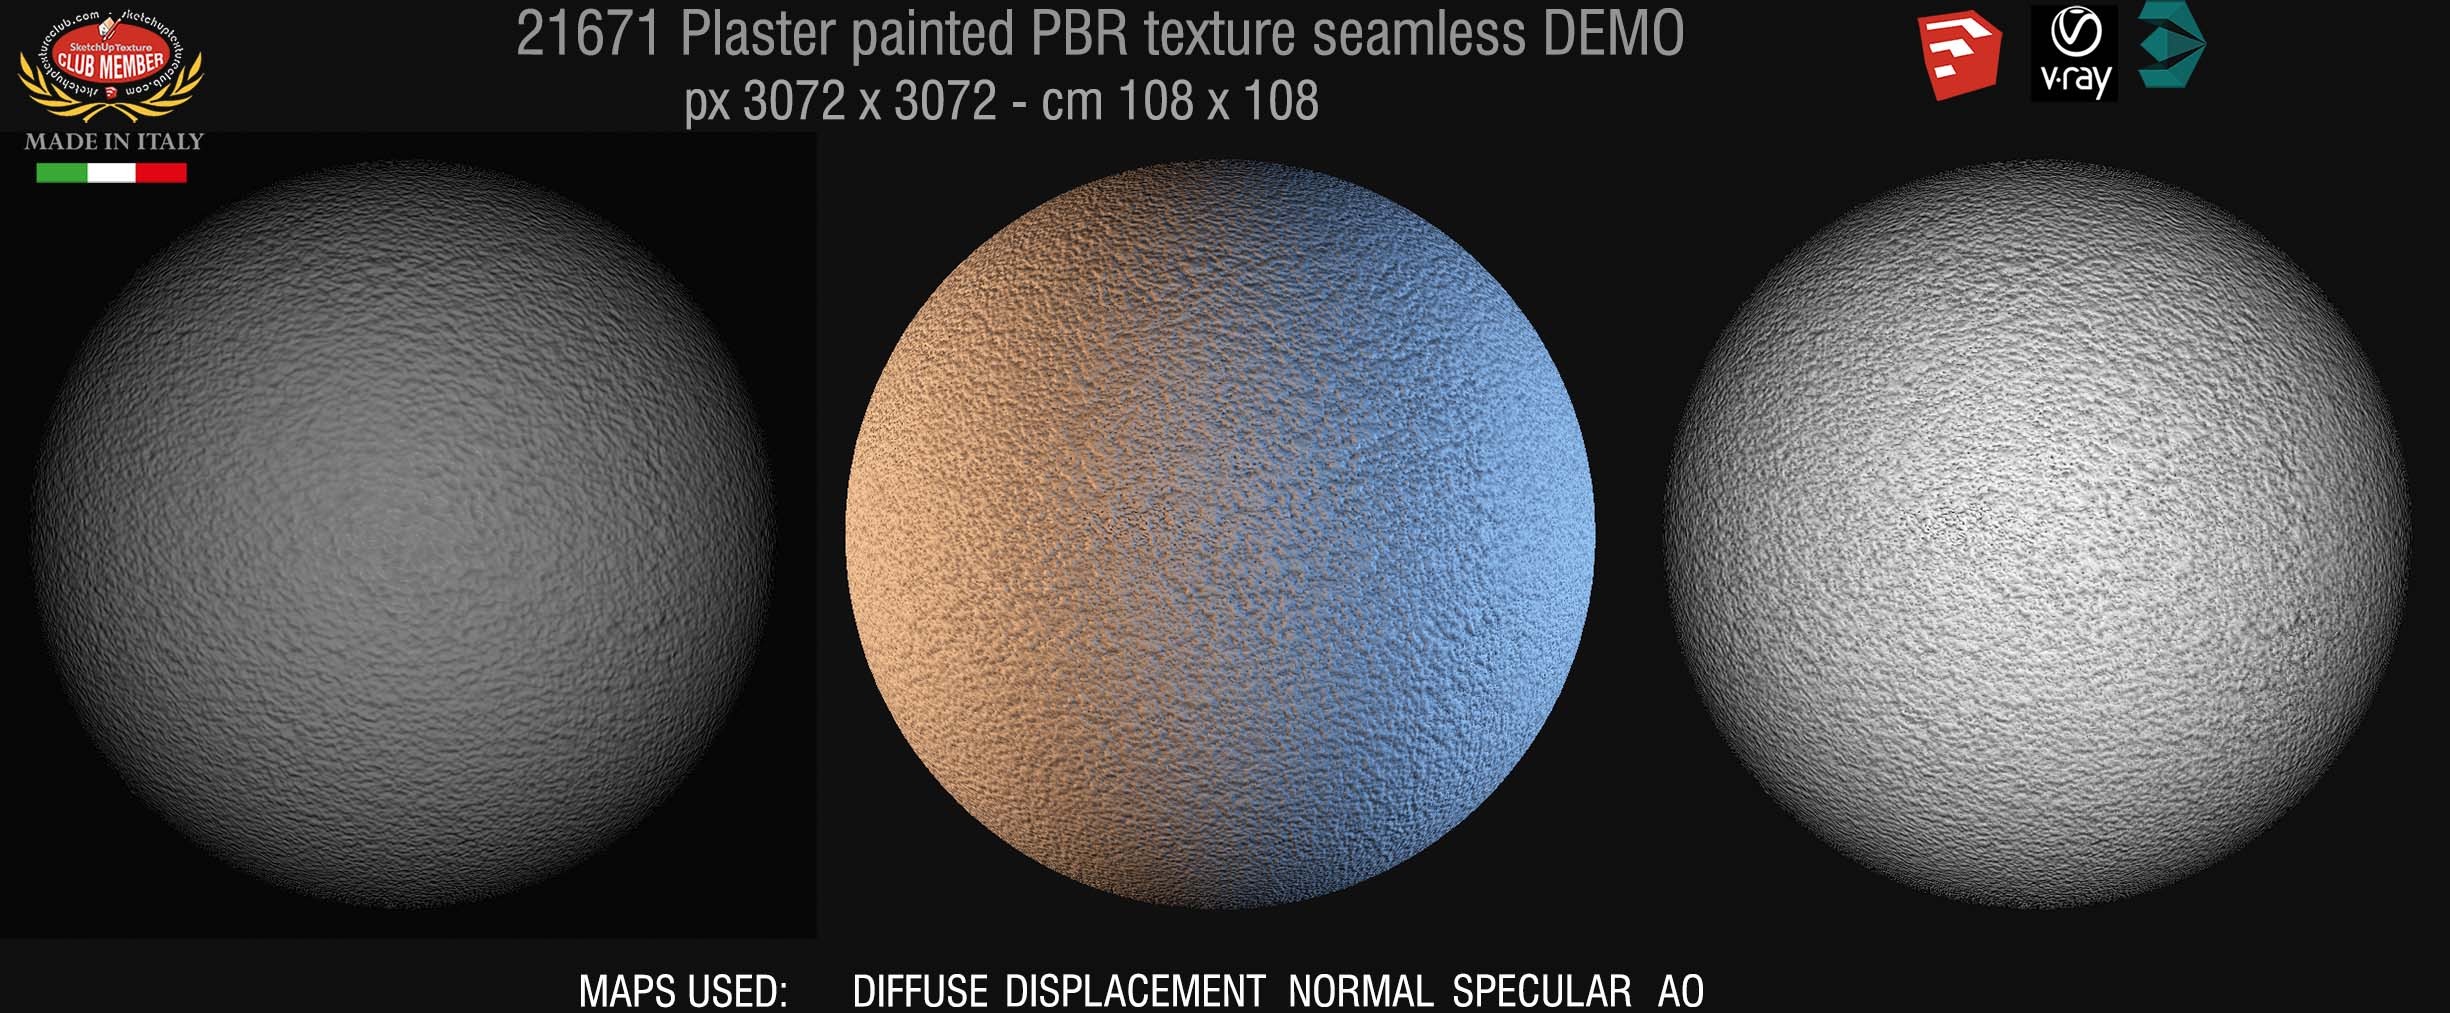 21671 plaster painted PBR texture seamless DEMO